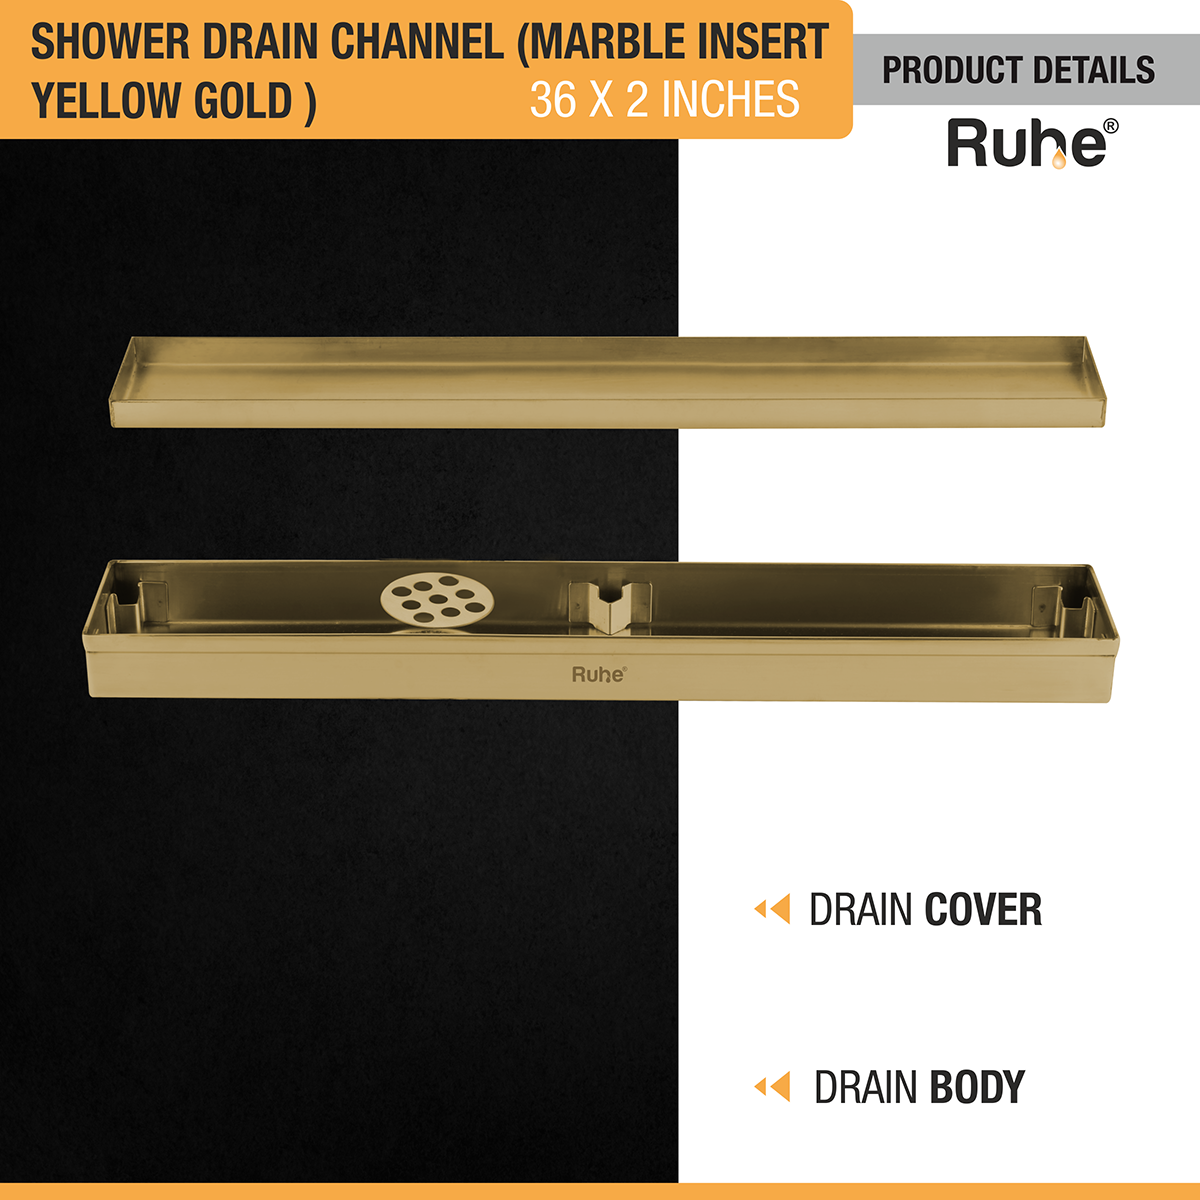 Marble Insert Shower Drain Channel (36 x 2 Inches) YELLOW GOLD PVD Coated with drain cover and drain body